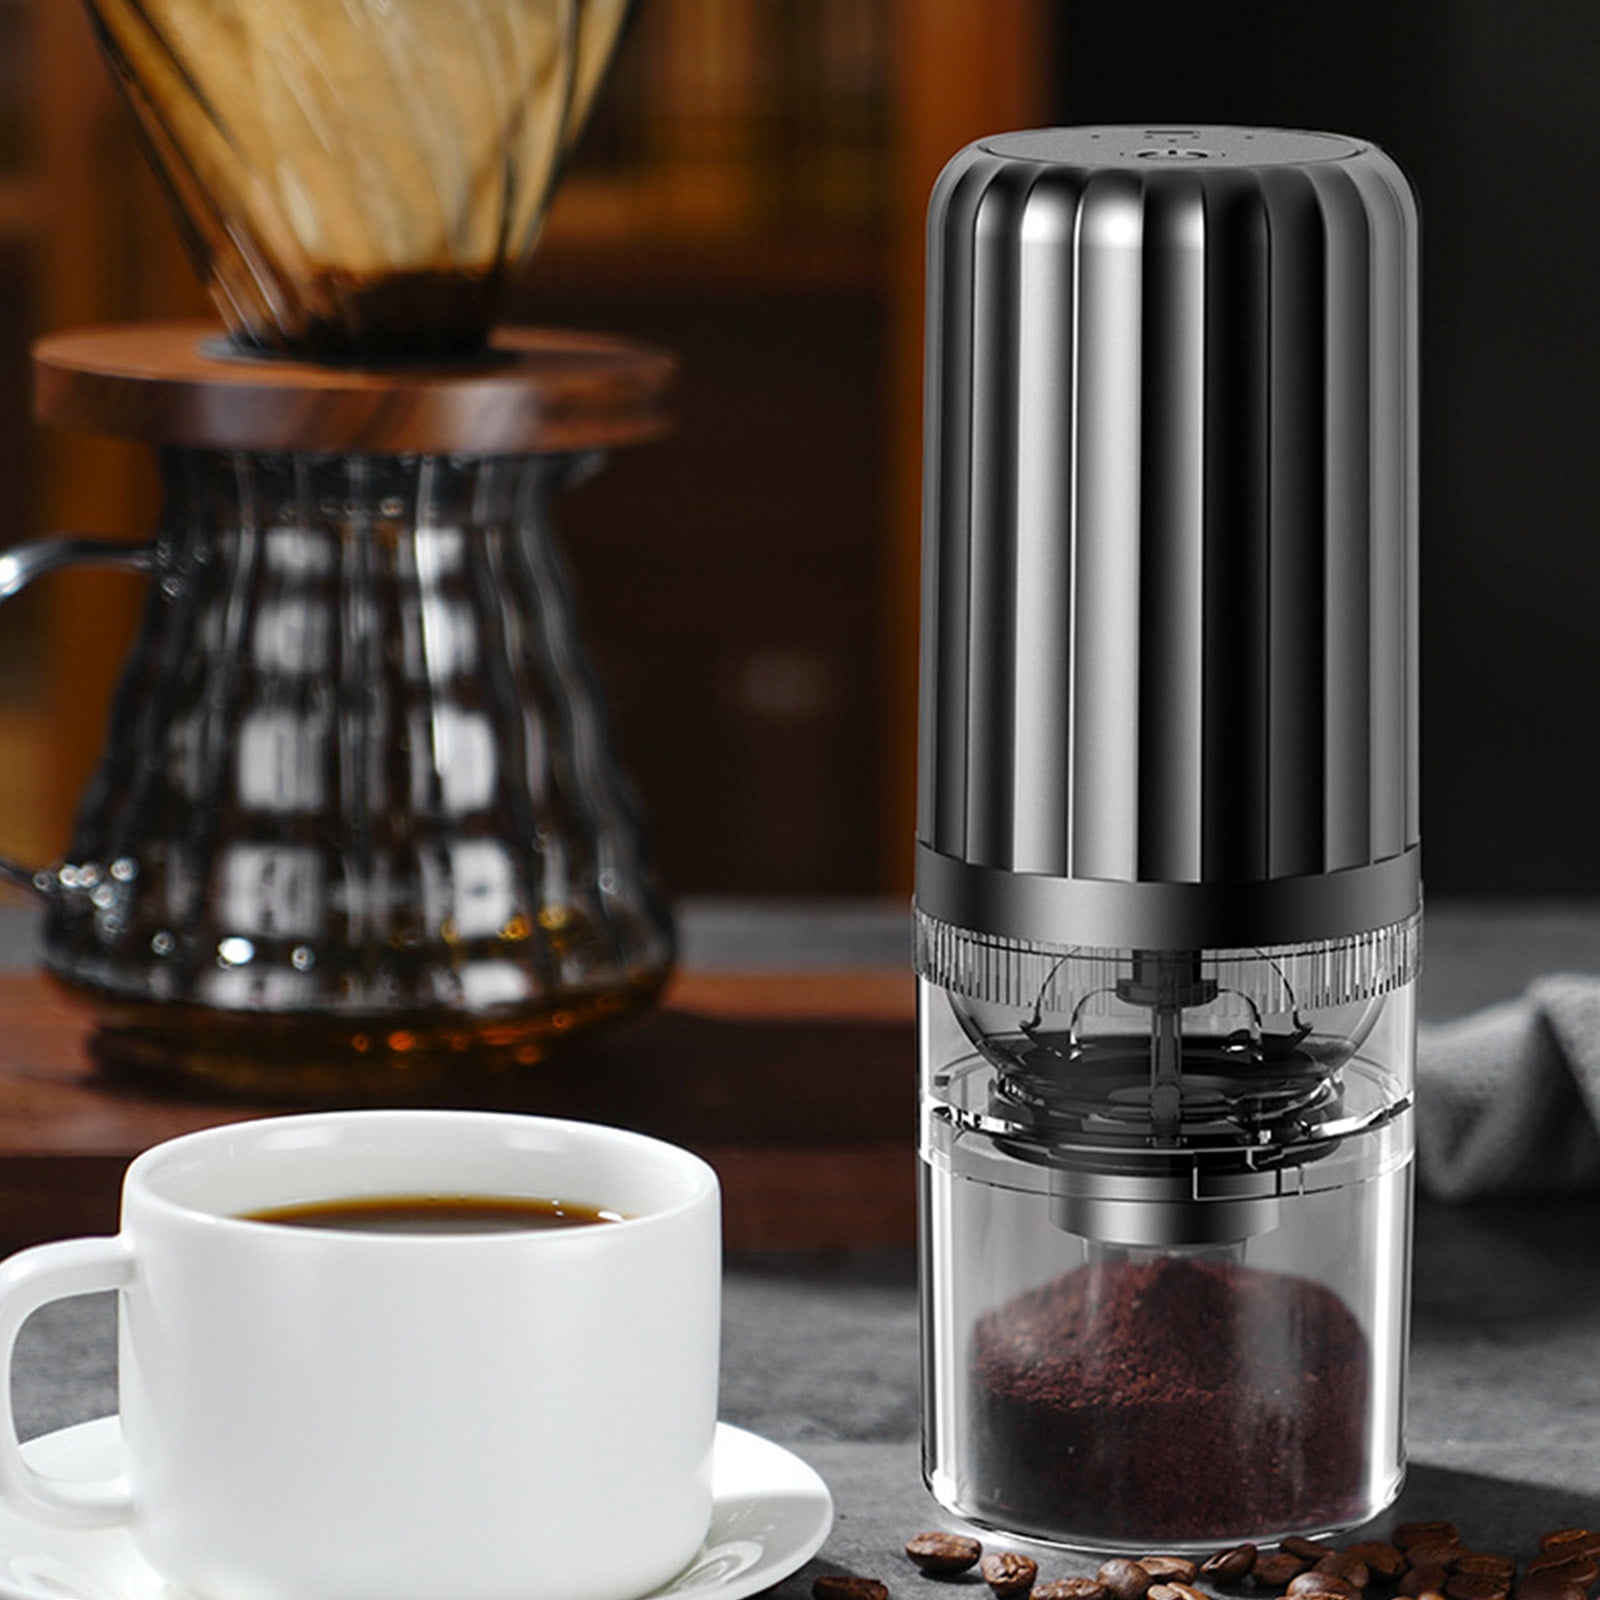 Courant 1 oz. Black Coffee Mill Electric Bladed Coffee Grinder for Coffee Beans, Spices with Stainless Steel Blades